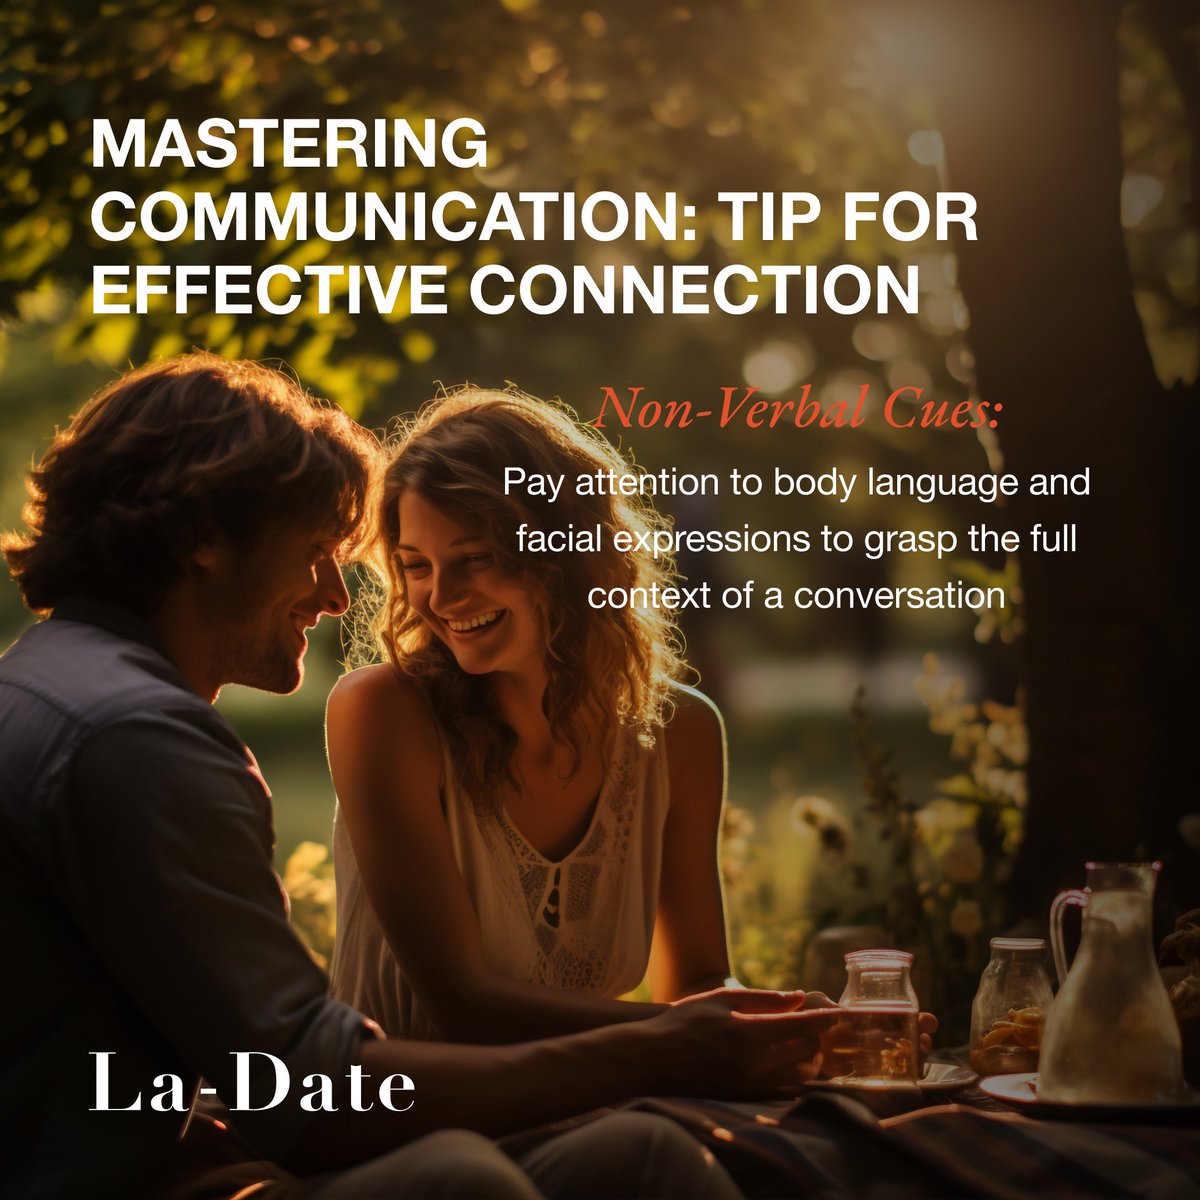 Effective communication is the key to building strong connections 💬🤗

#LaDate #EffectiveCommunication #ConnectionBuilding